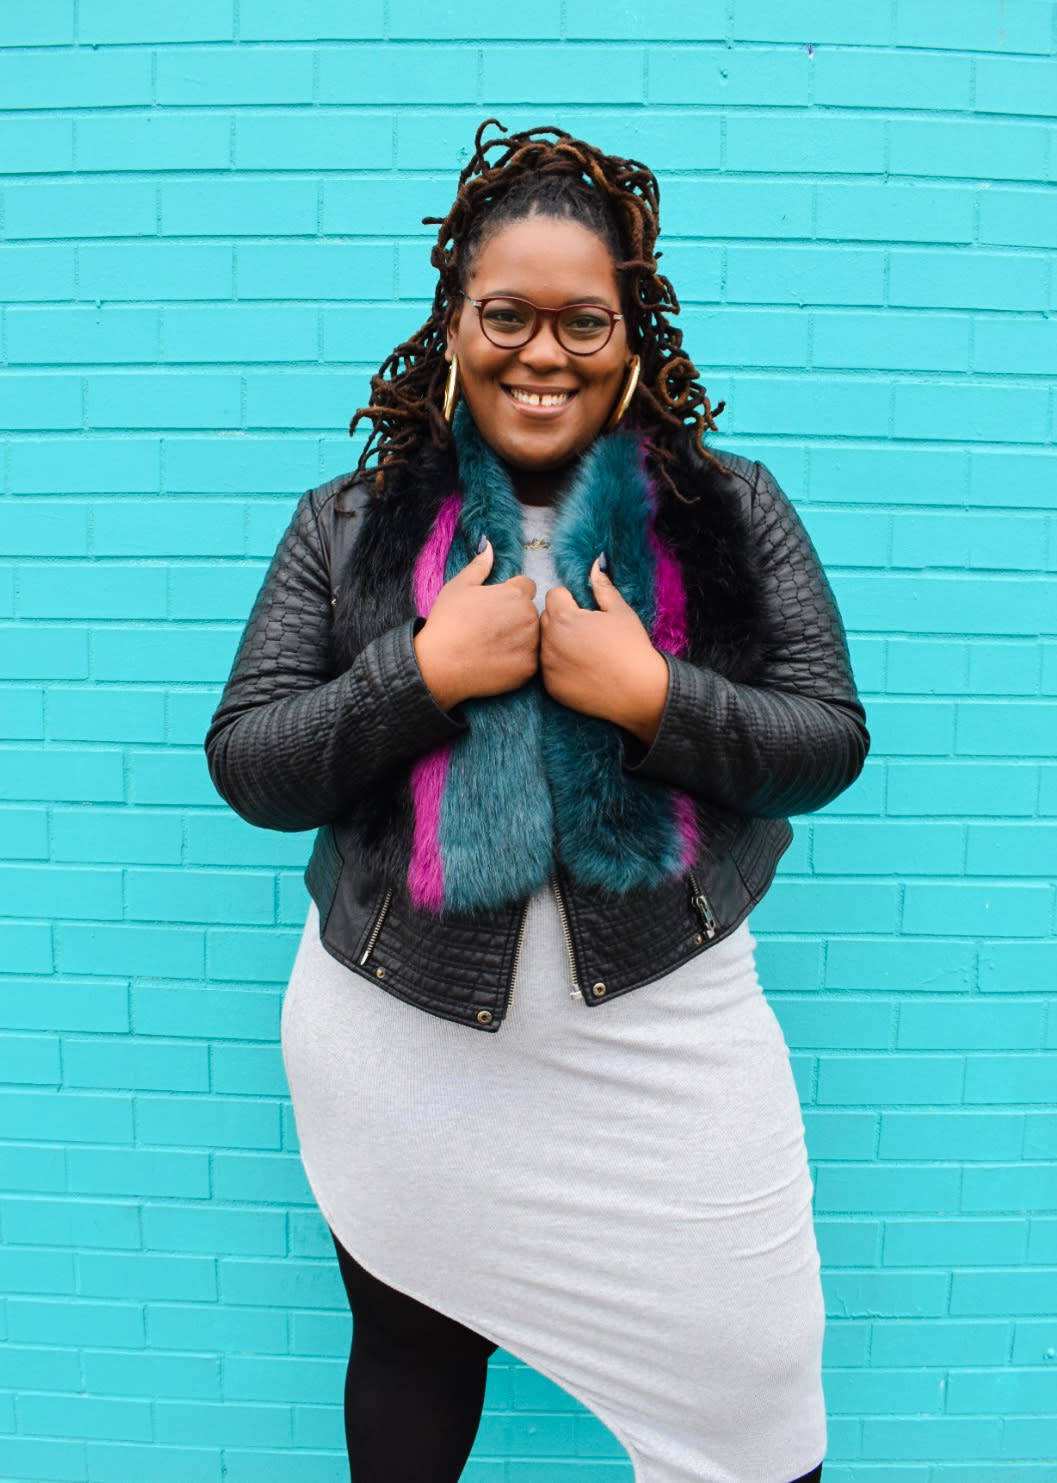 Confident Black Woman Embracing Her Curves in a Teal Background Wallpaper